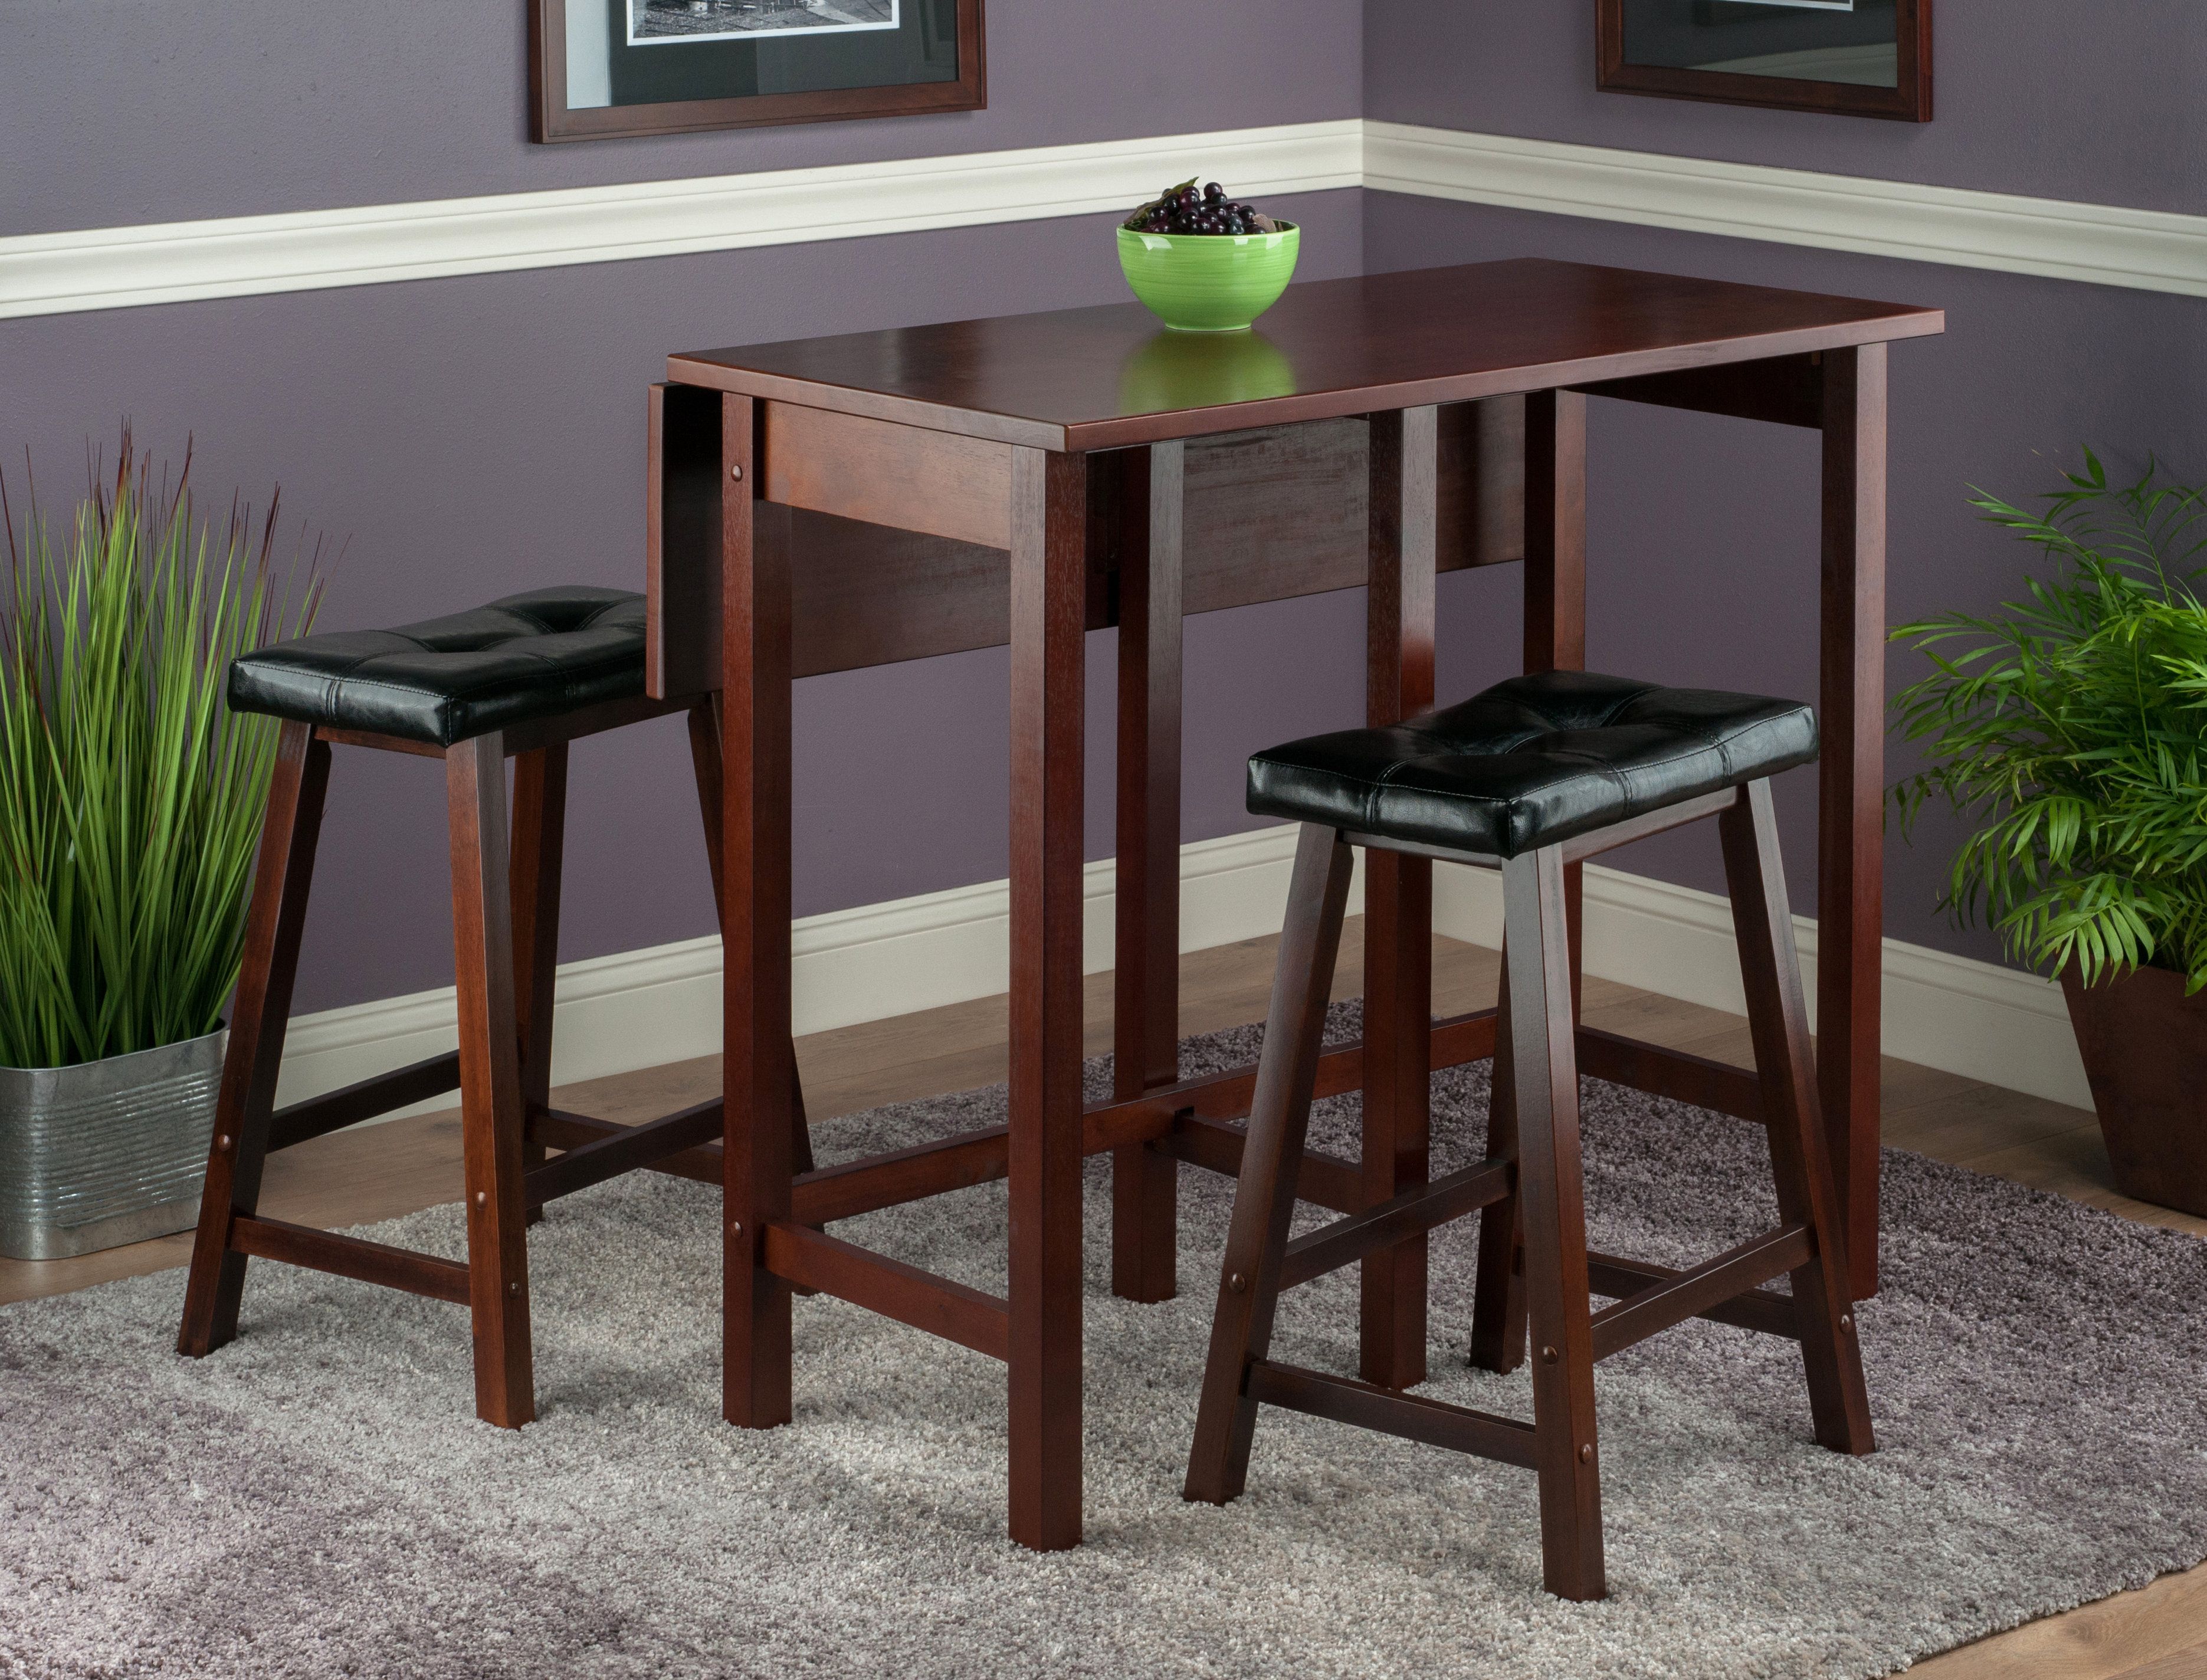 Bettencourt 3 Piece Counter Height Dining Sets Intended For Well Known Red Barrel Studio Bettencourt 3 Piece Counter Height Dining Set (Photo 1 of 20)